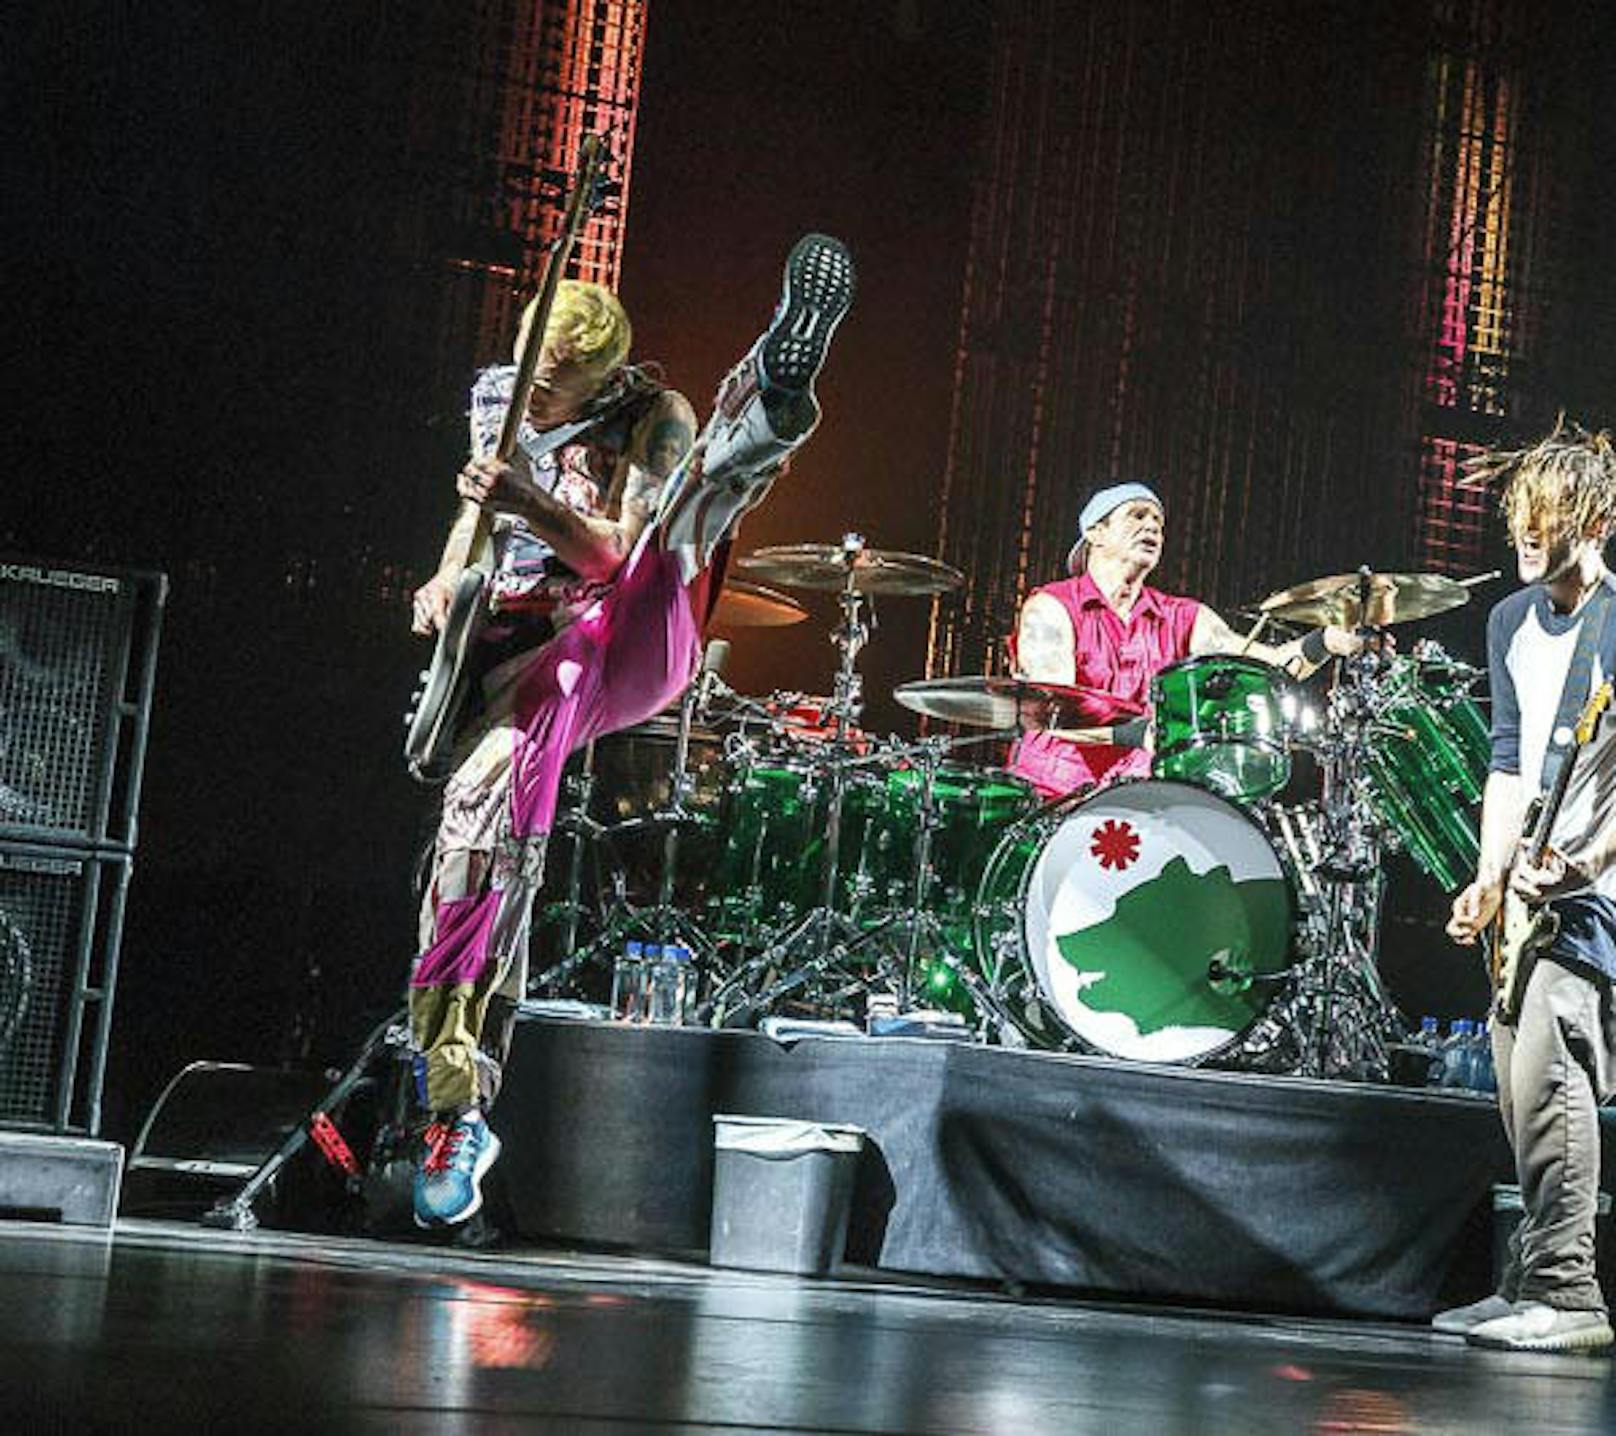 Platz 5: Red Hot Chili Peppers